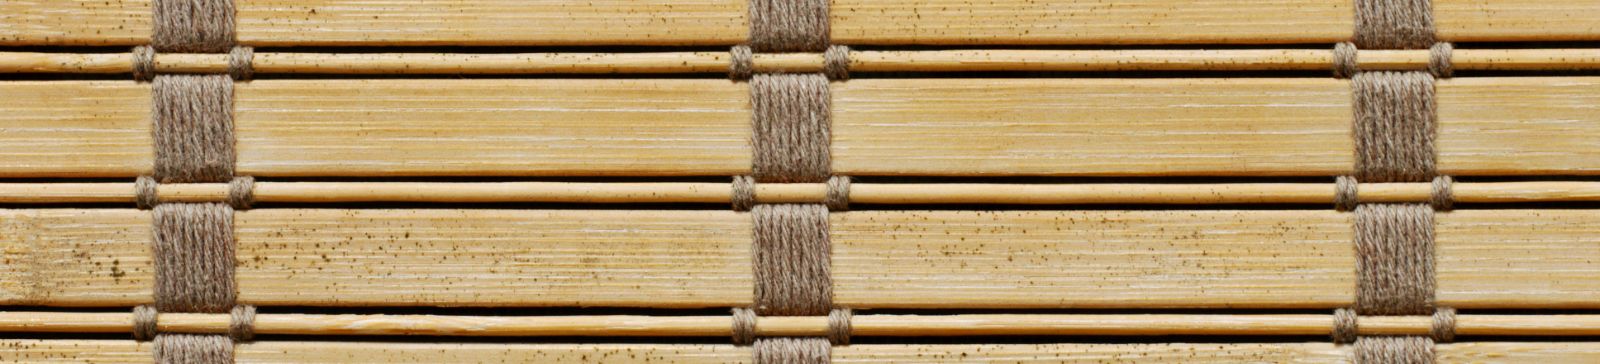 Woven Wood Blinds